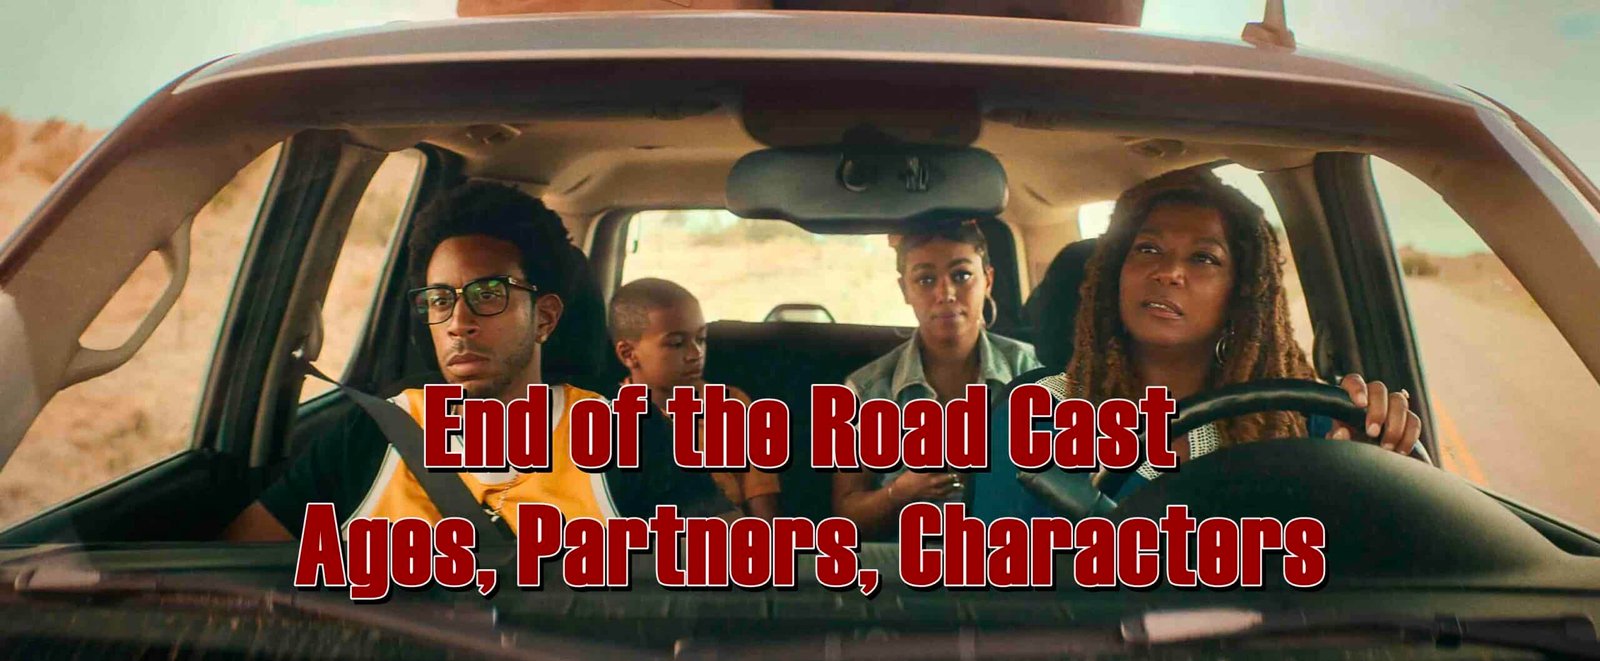 End of the Road Cast - Ages, Partners, Characters